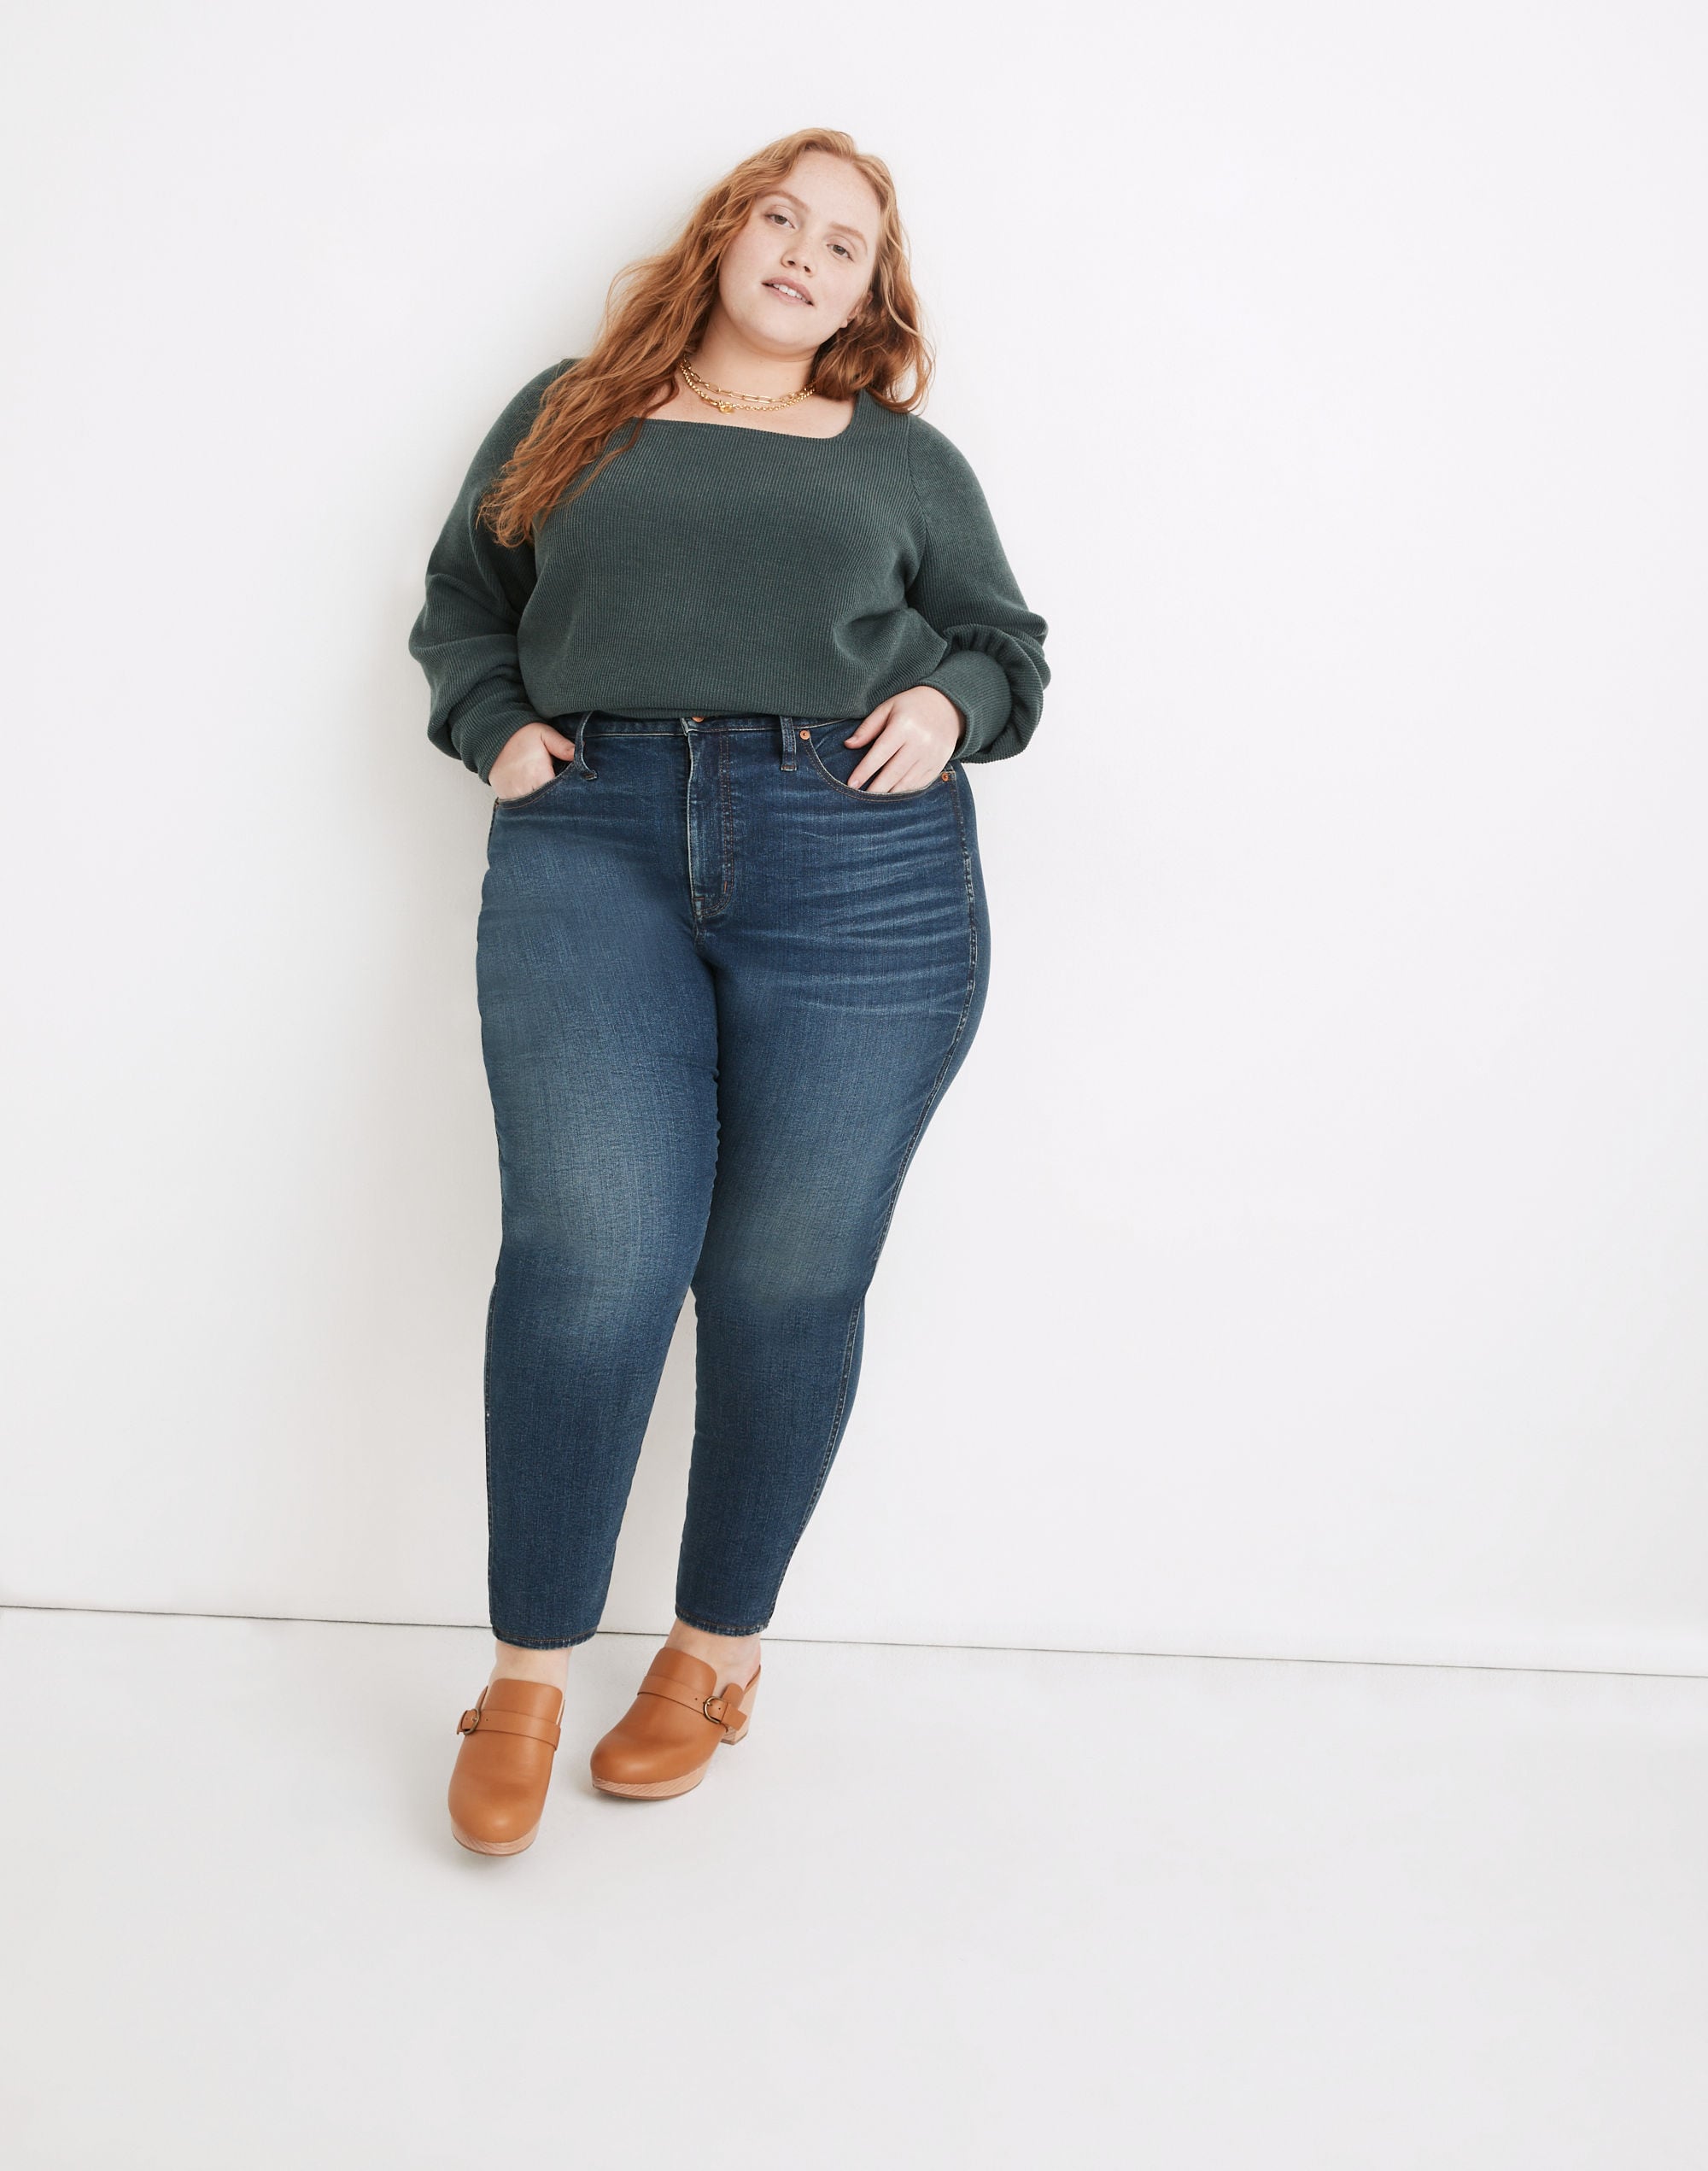 Plus Curvy High-Rise Skinny Jeans in Lanette Wash